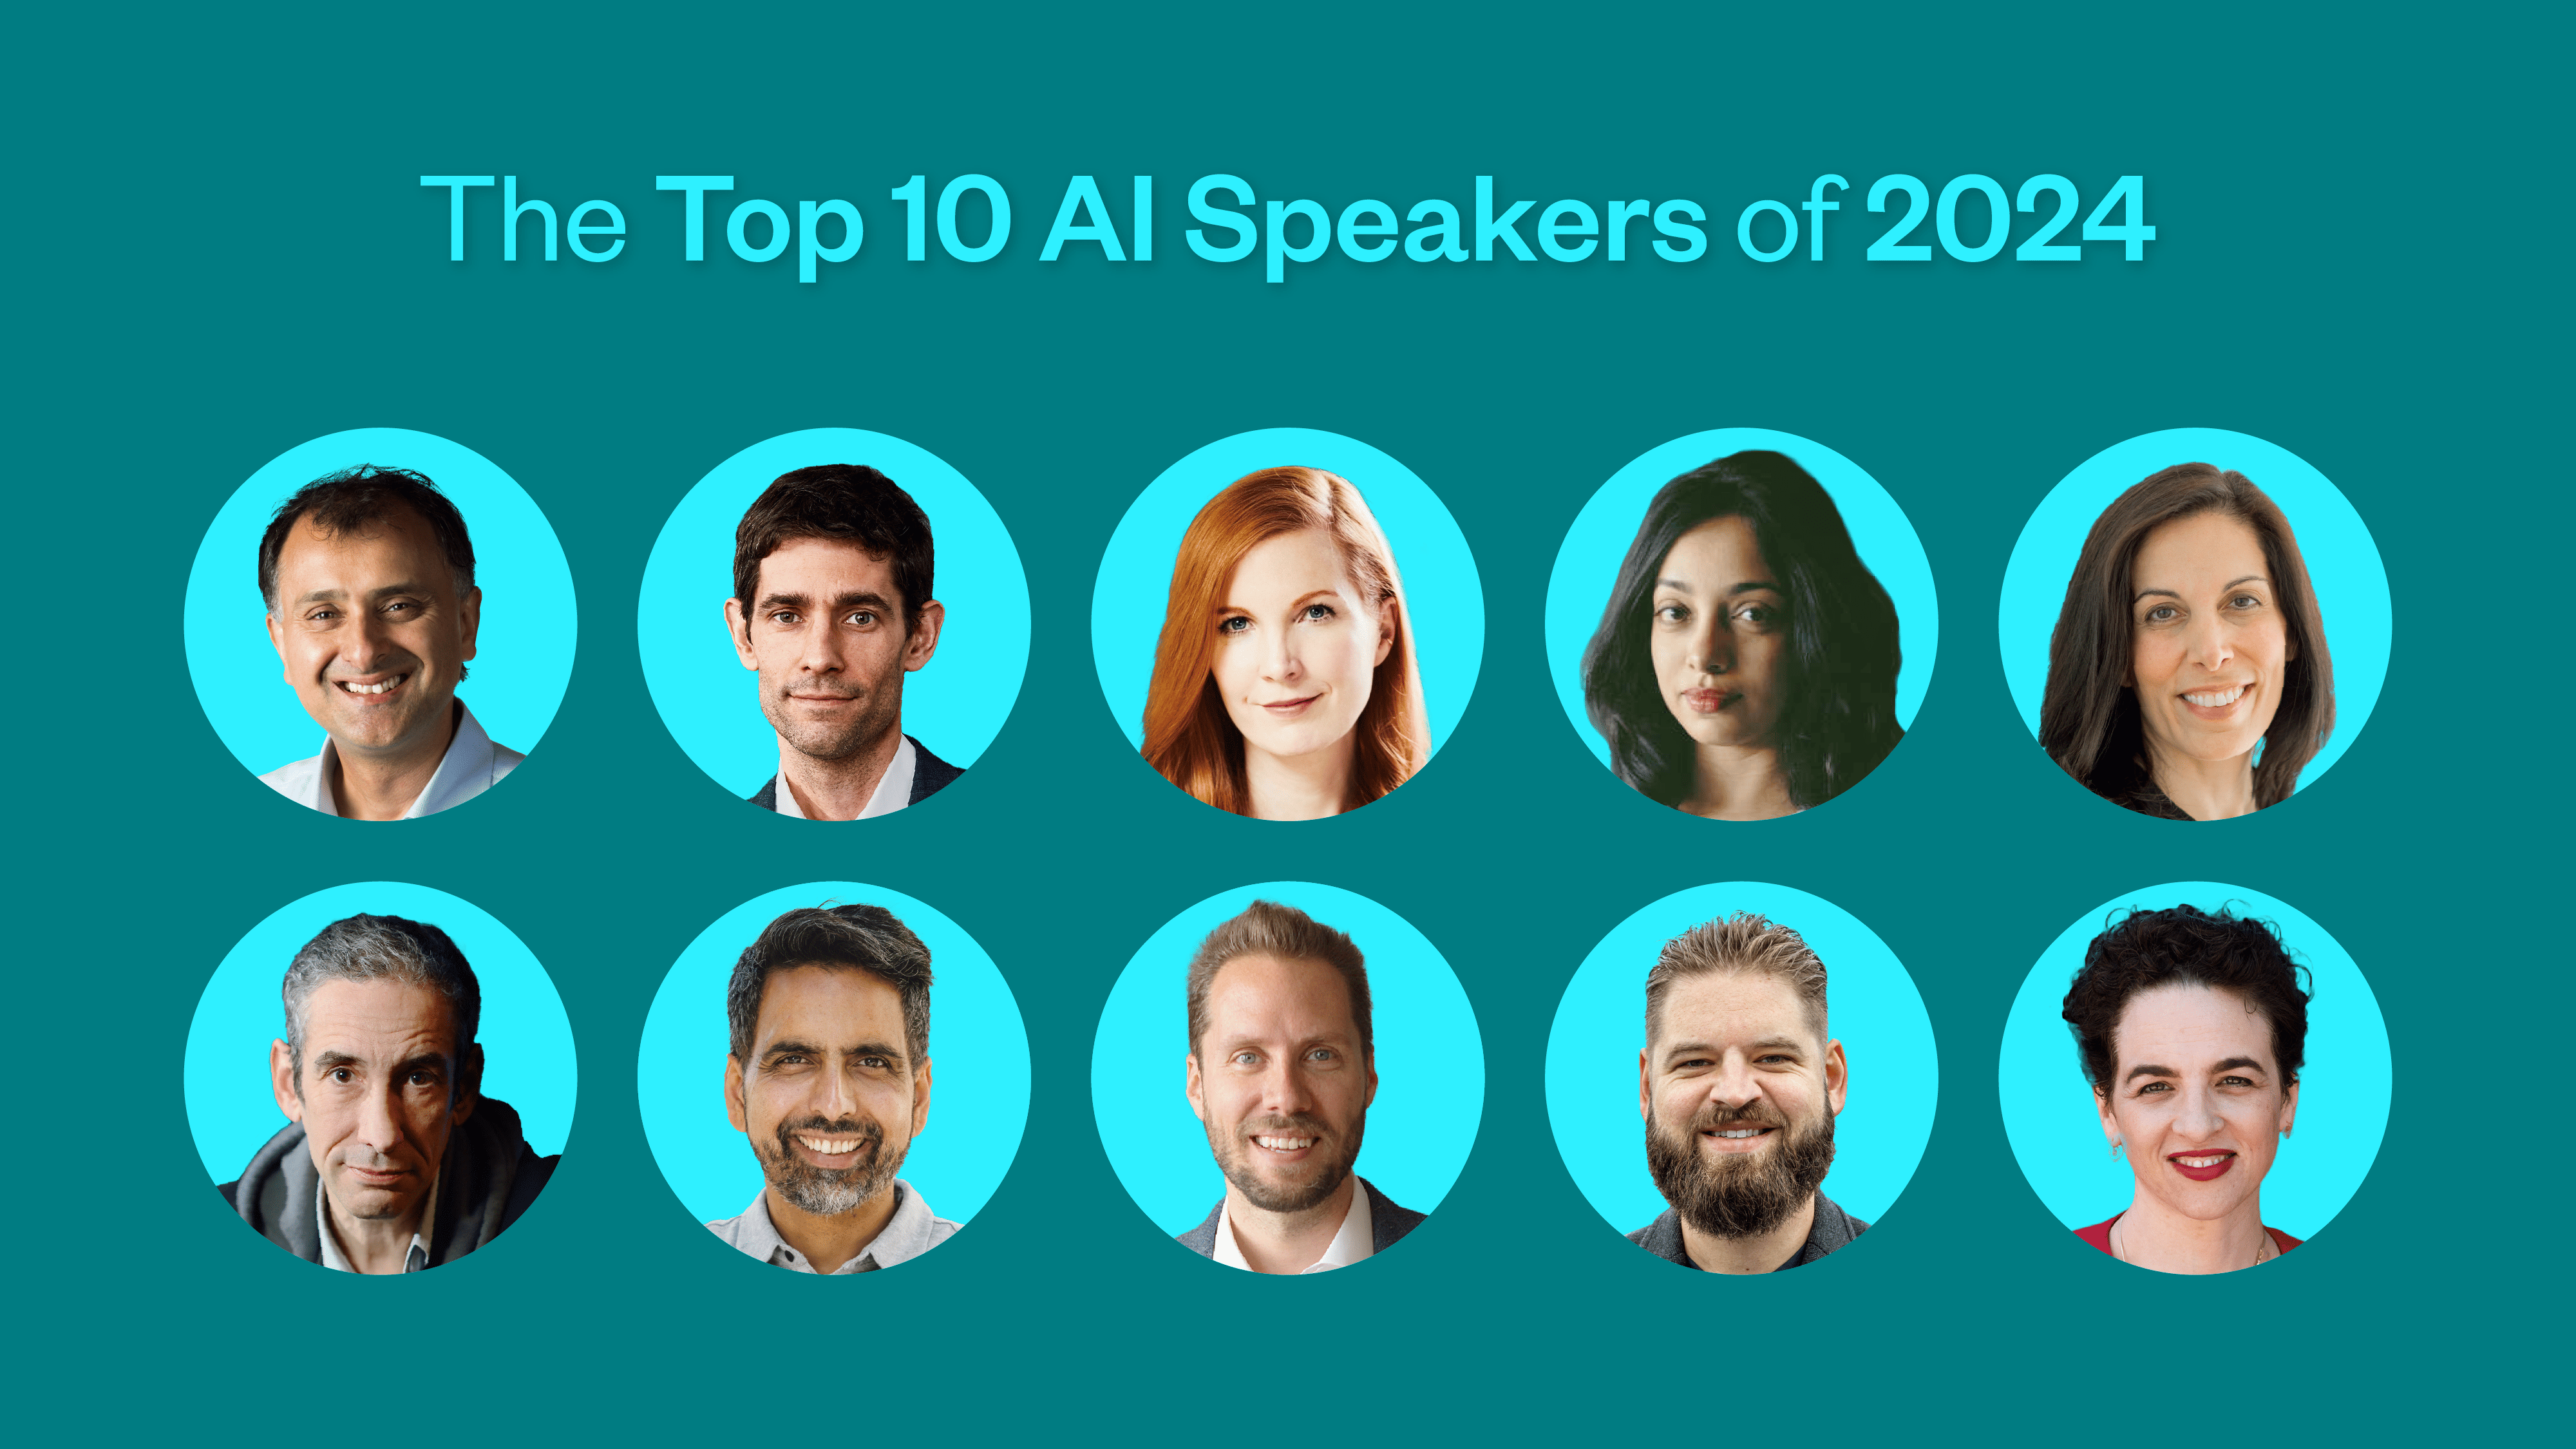 The Top 10 AI Speakers for 2024: This Is How You Thrive in the AI Revolution